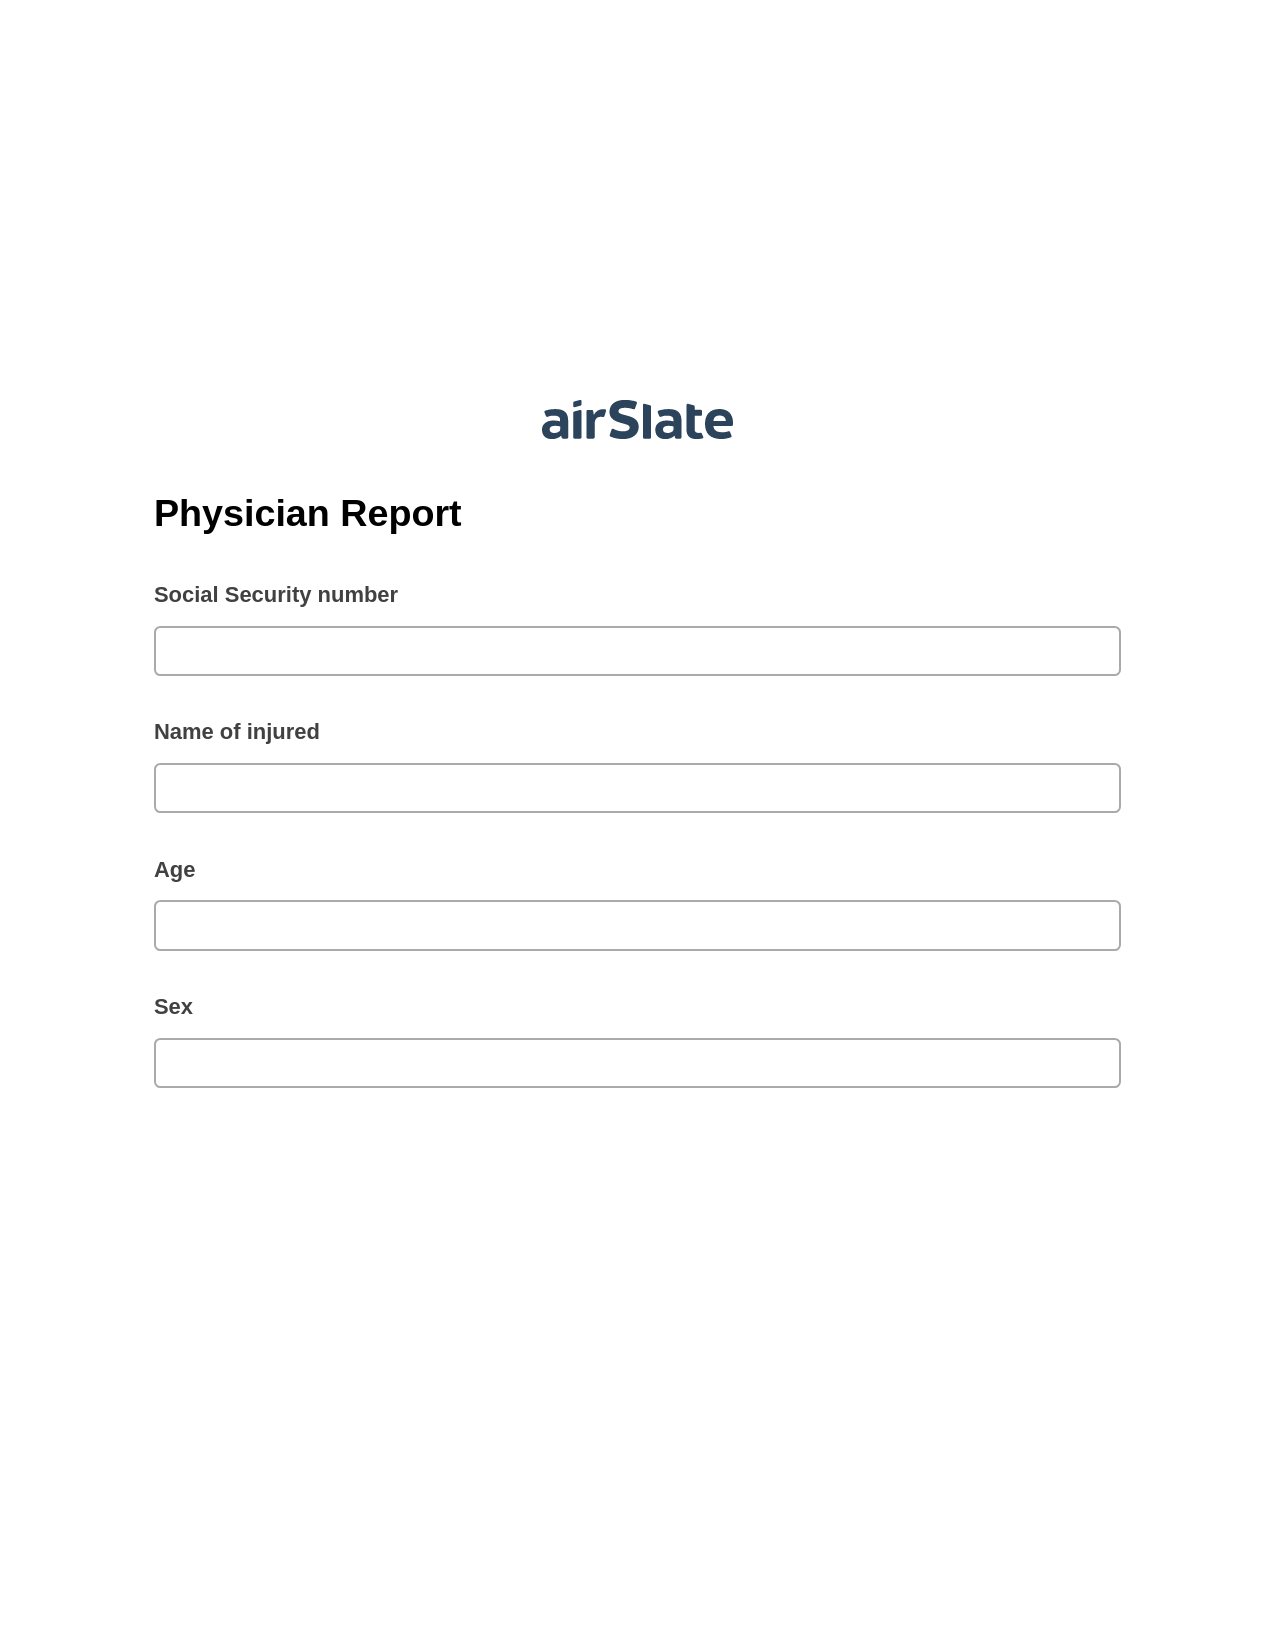 Multirole Physician Report Pre-fill from CSV File Bot, Unassign Role Bot, Export to MySQL Bot